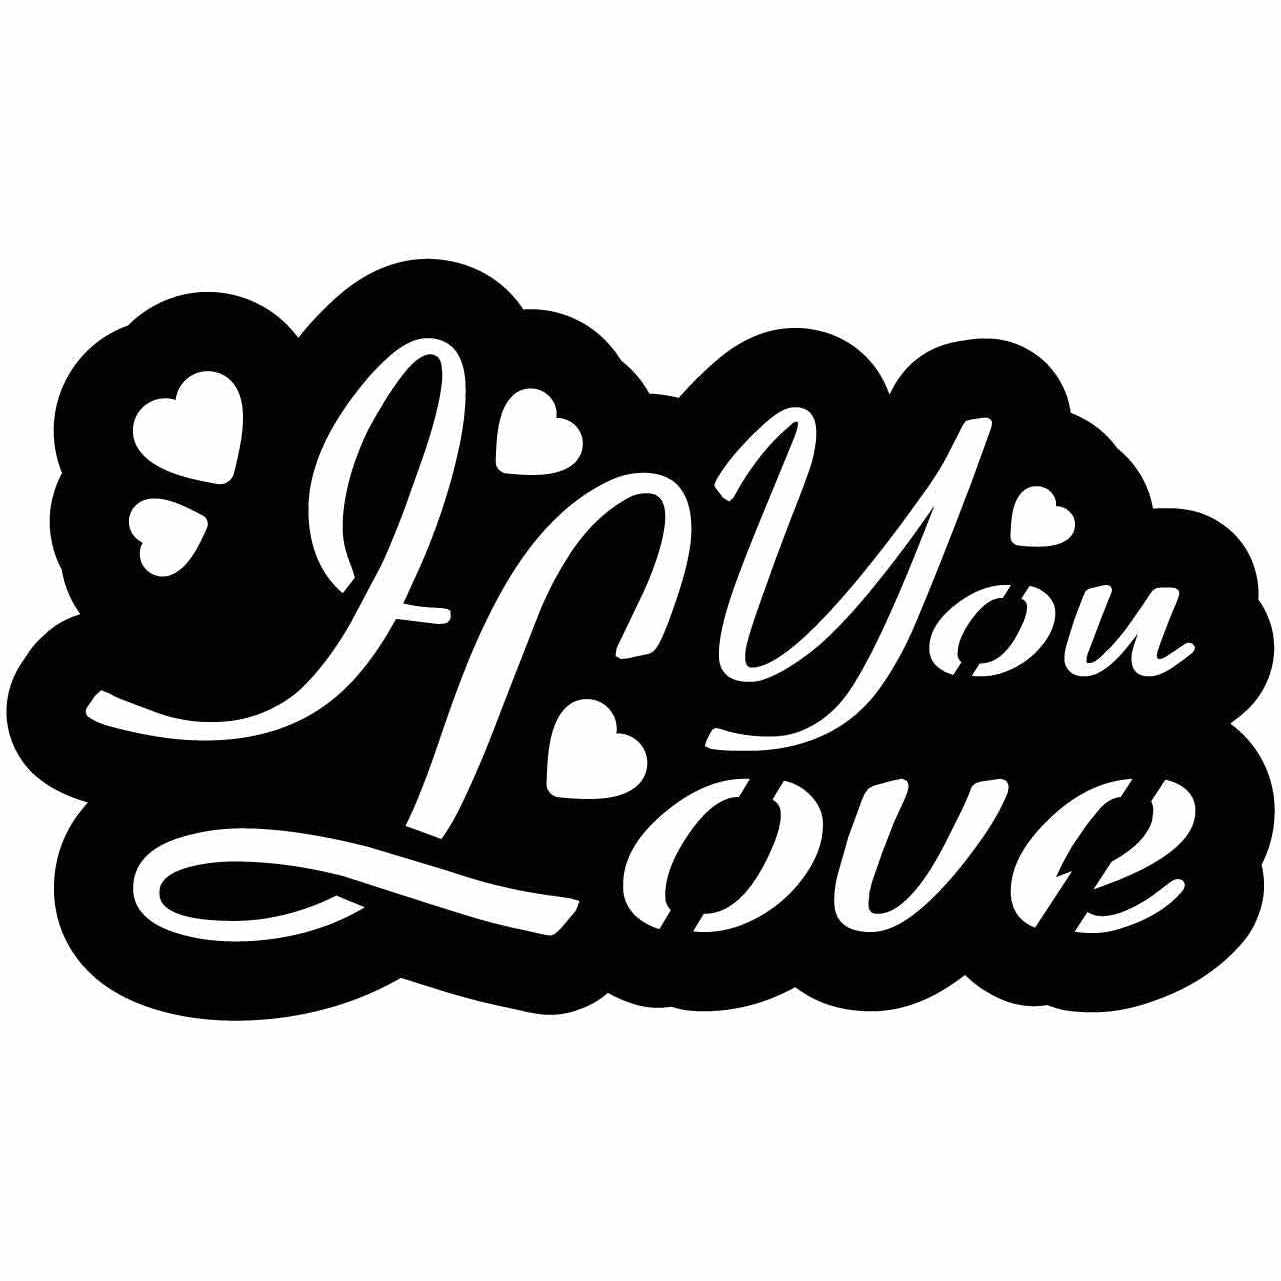 I Love You Free DXF files cut ready for CNC-DXFforCNC.com